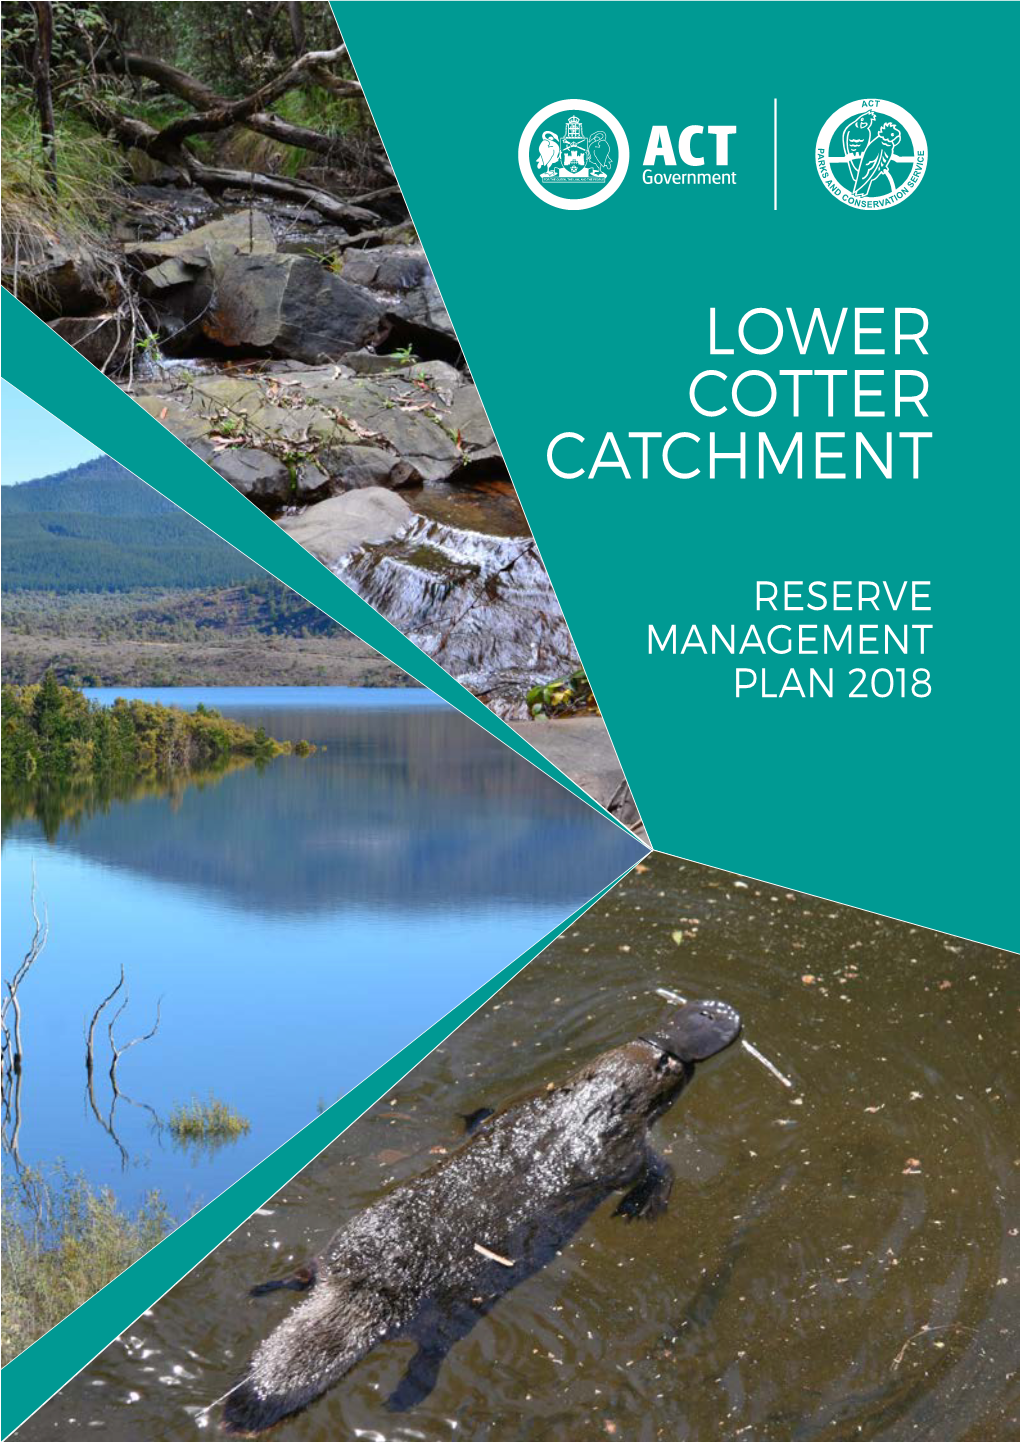 Lower Cotter Catchment